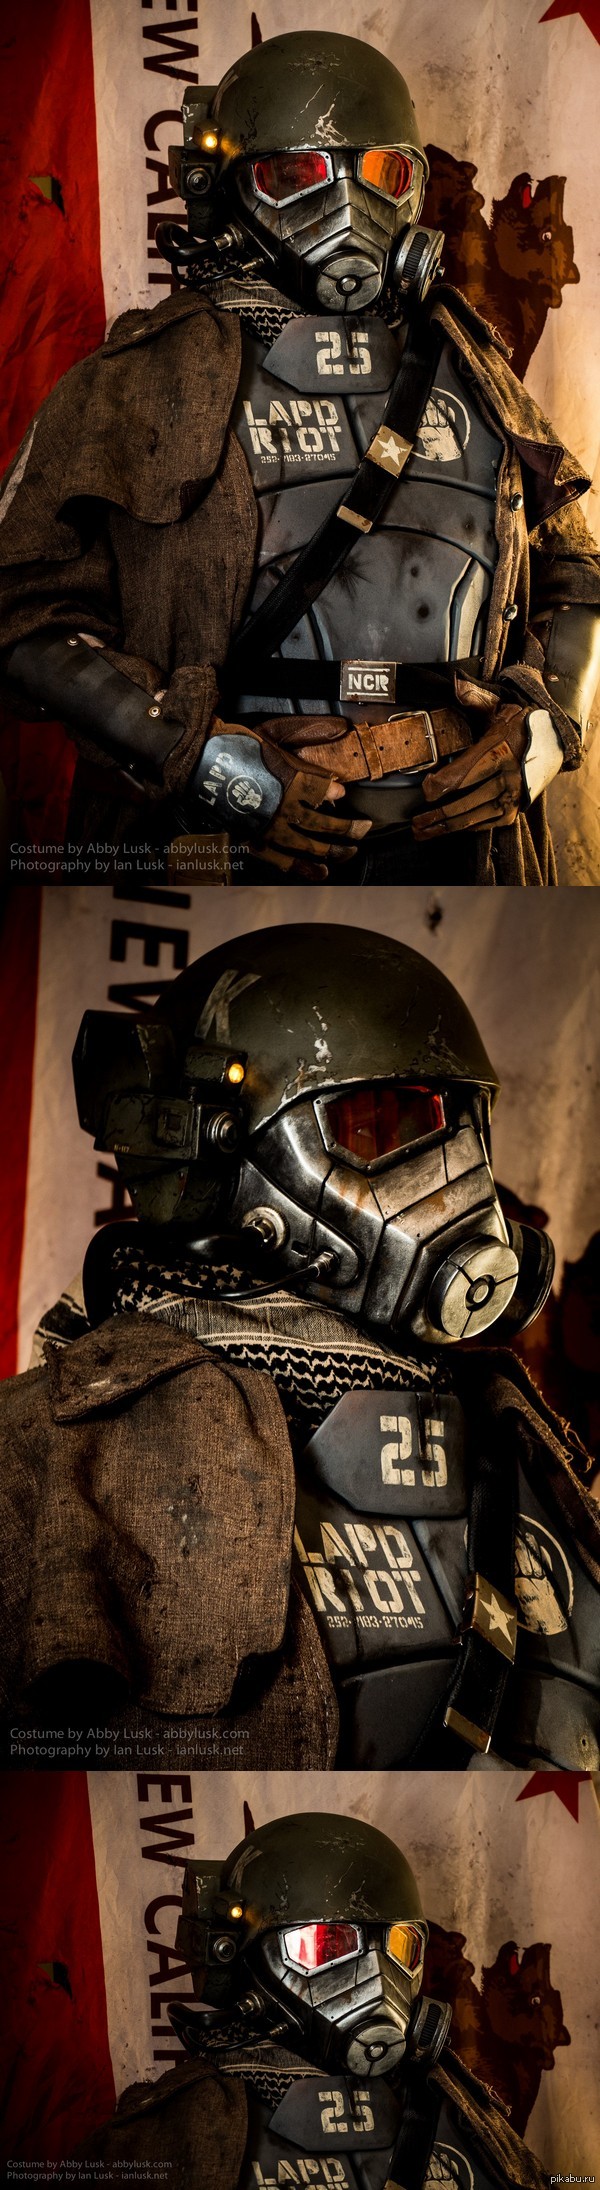 Fallout: New Vegas cosplay 